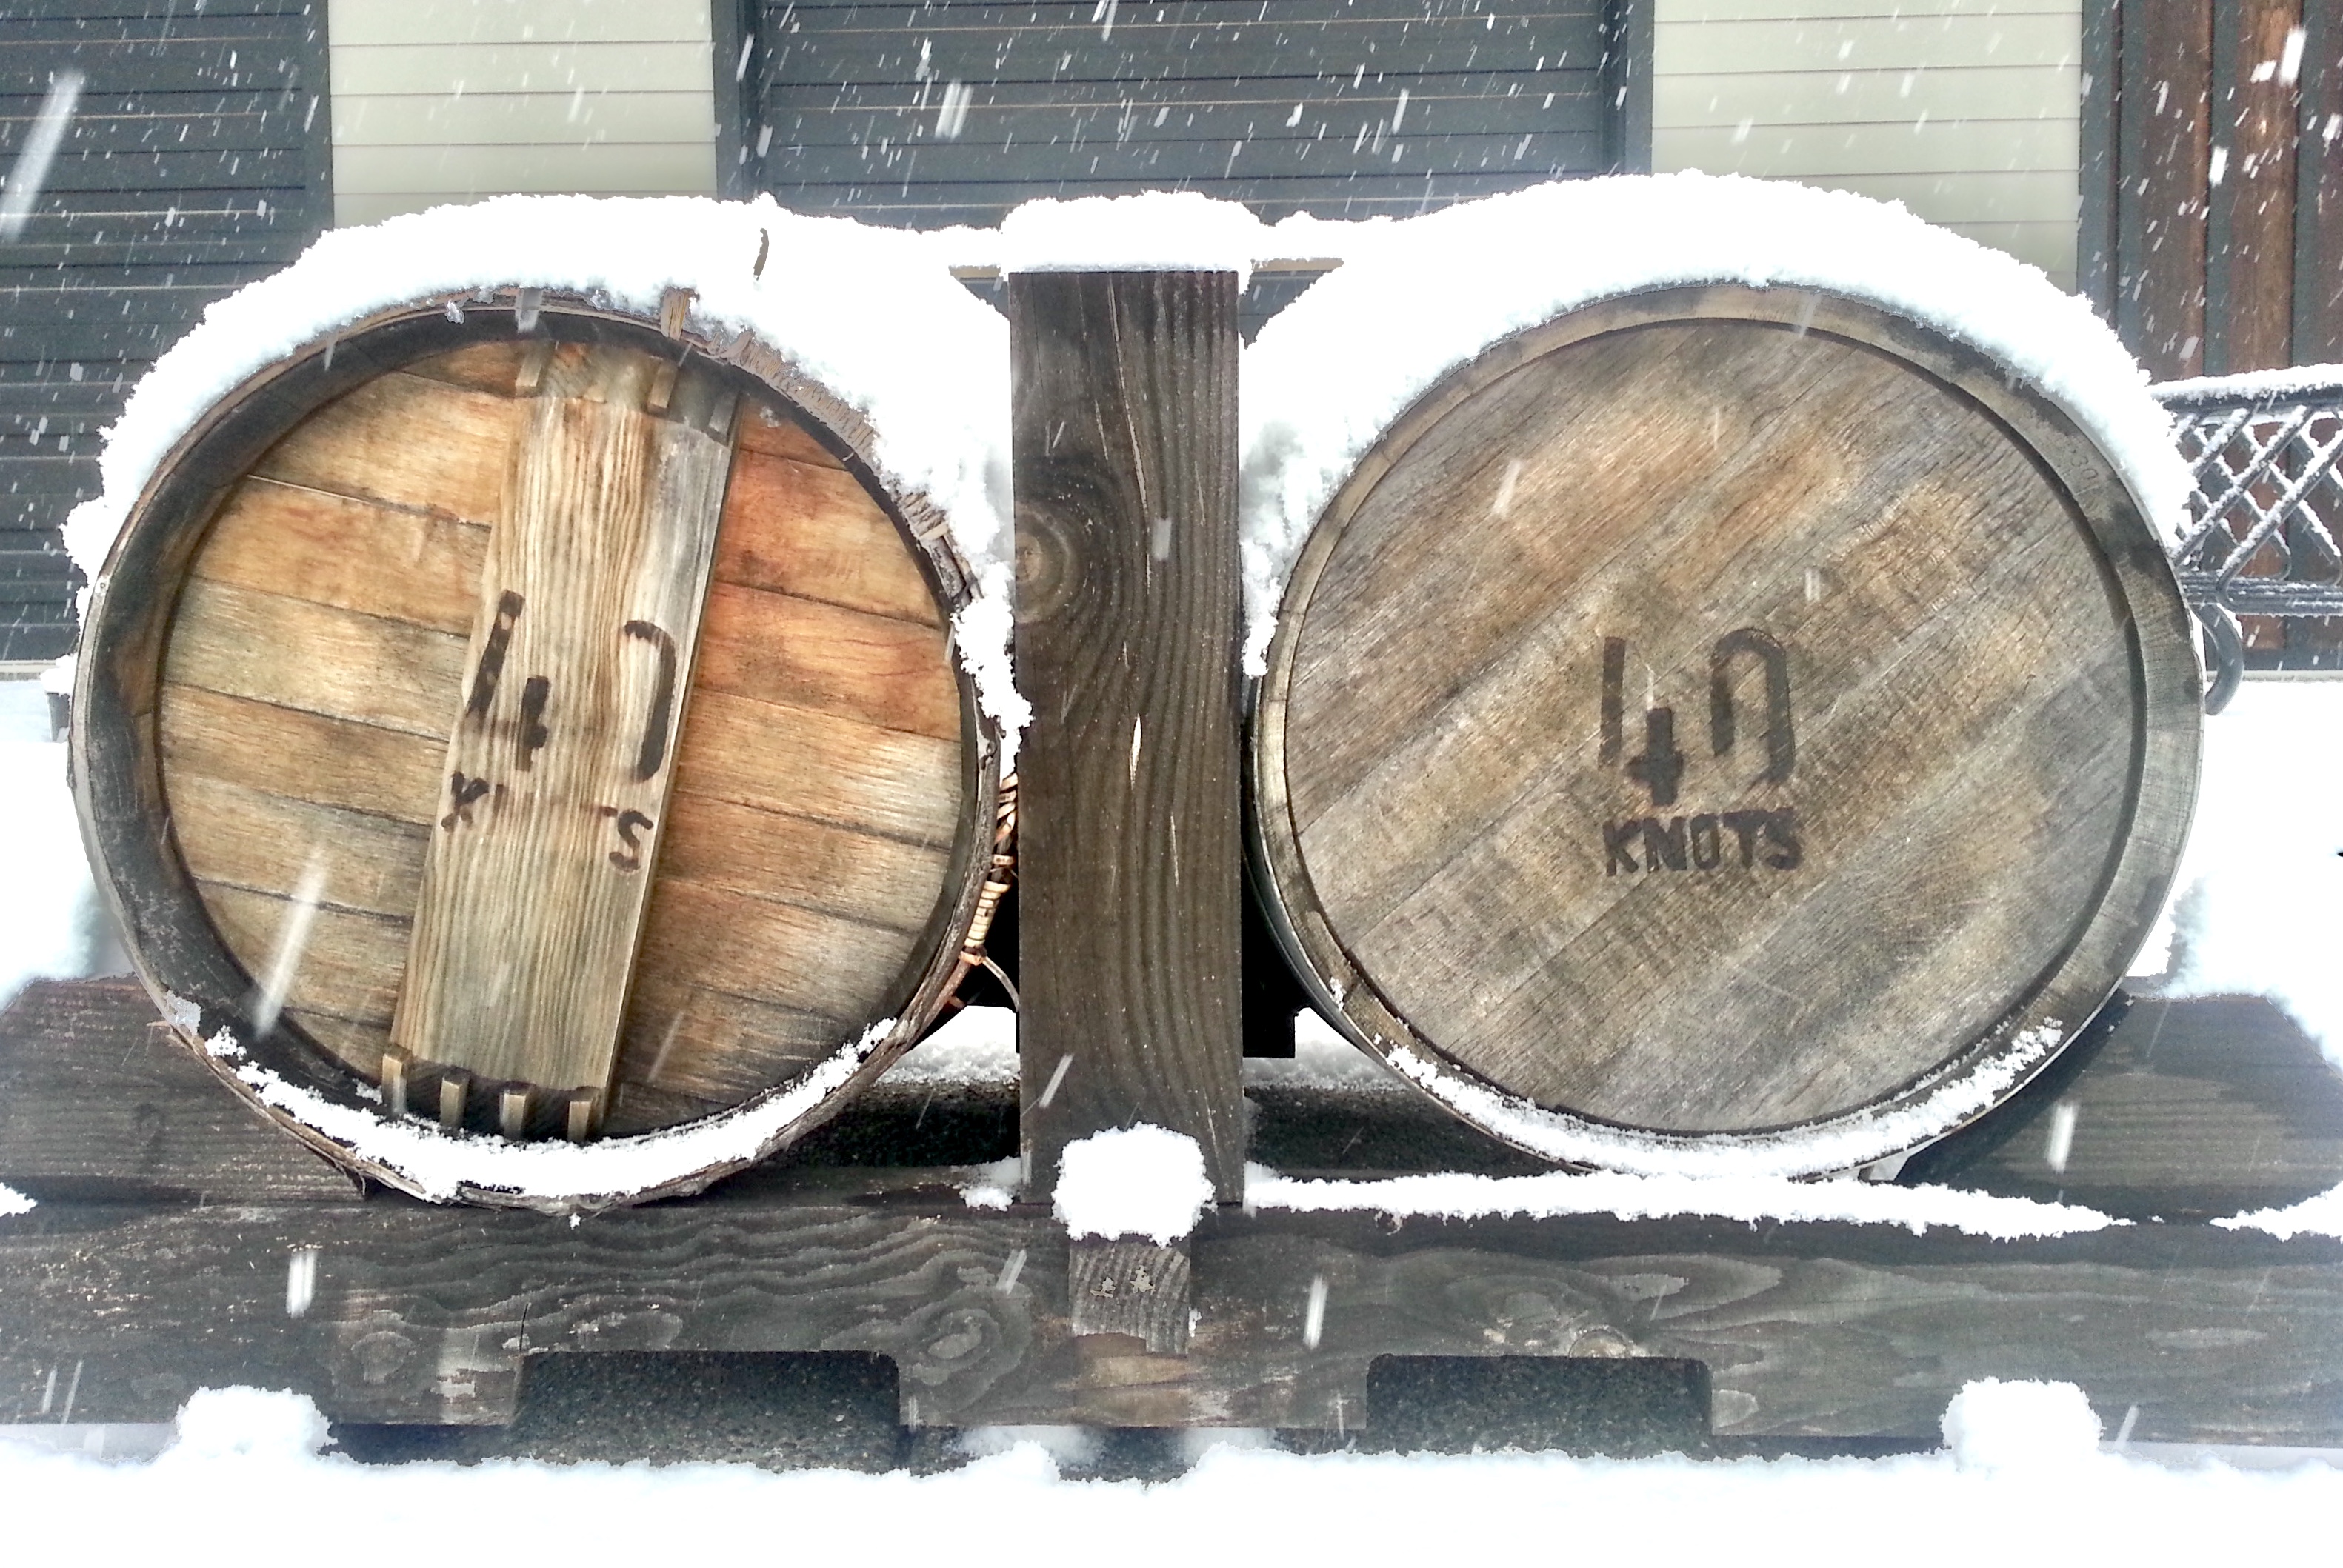 image of two wine casks covered in snow